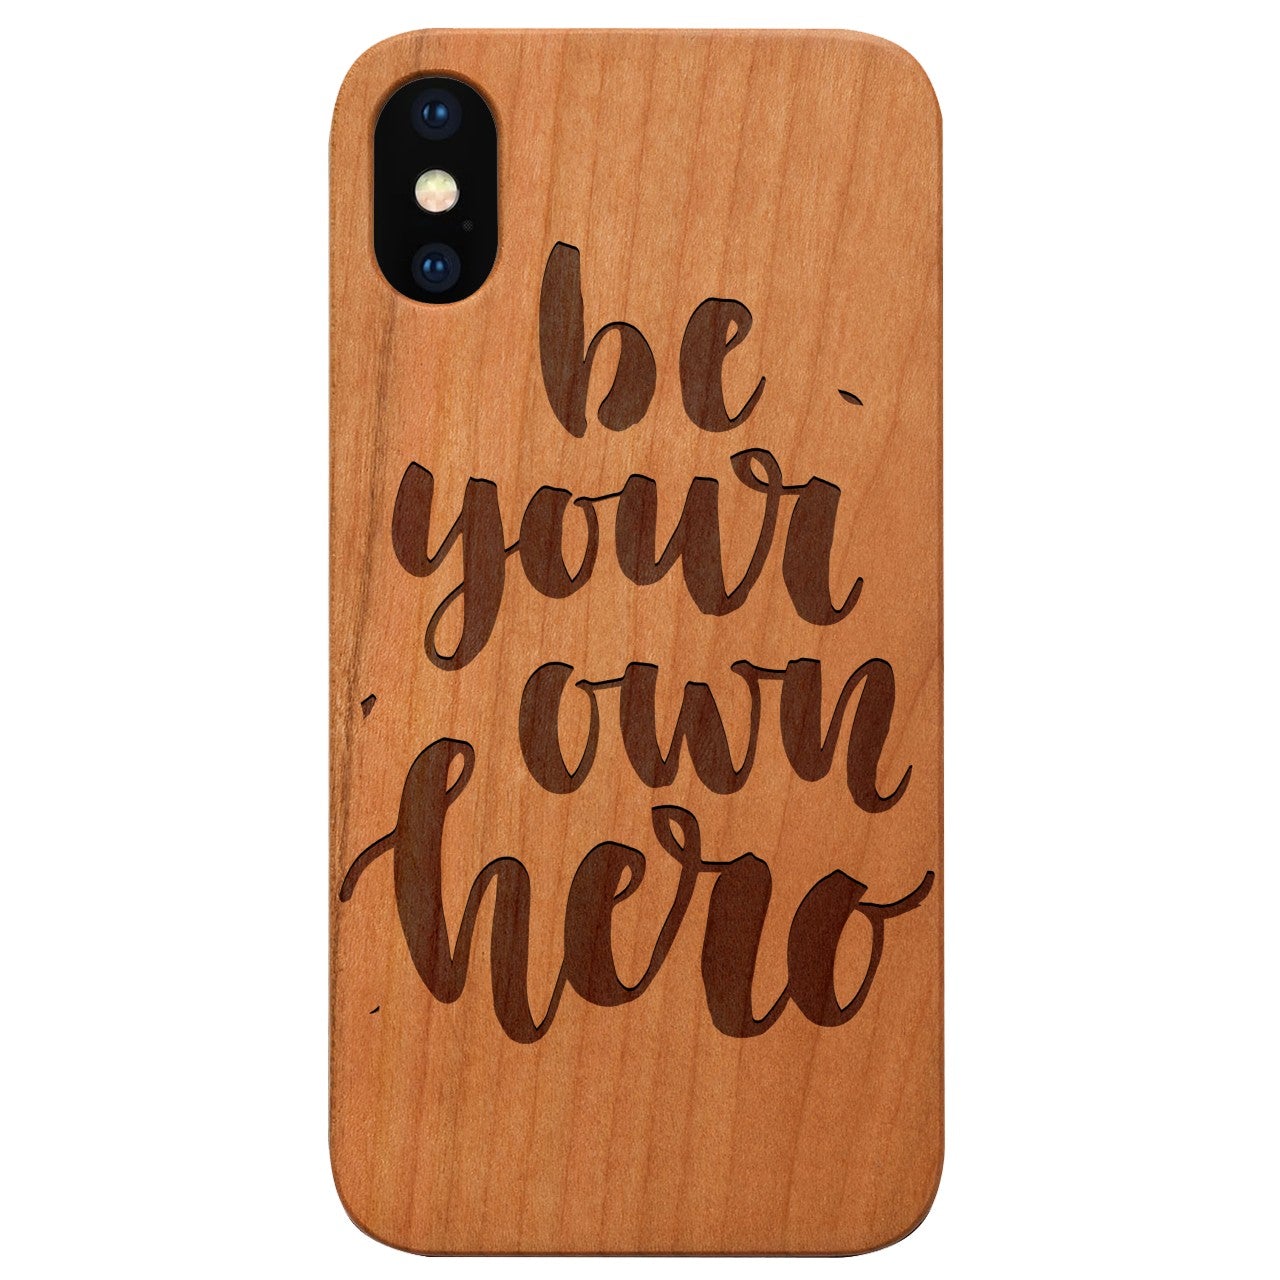  Be Your Own Hero - Engraved - Wooden Phone Case - IPhone 13 Models